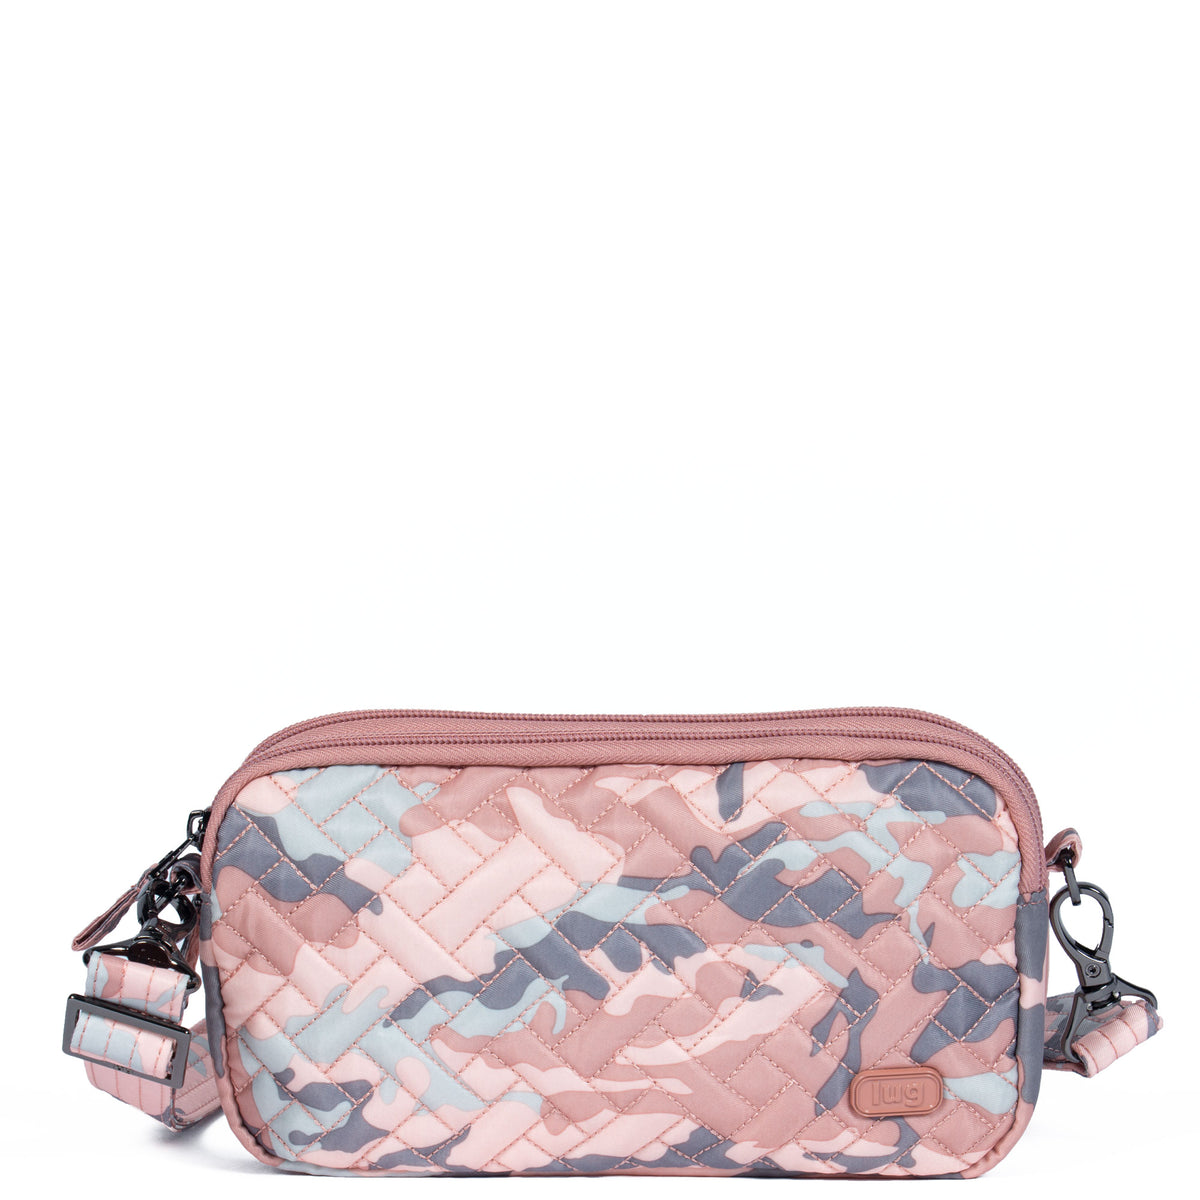 Lug Convertible Hip Pouch - Coupe XL Watermelon matte luxe New